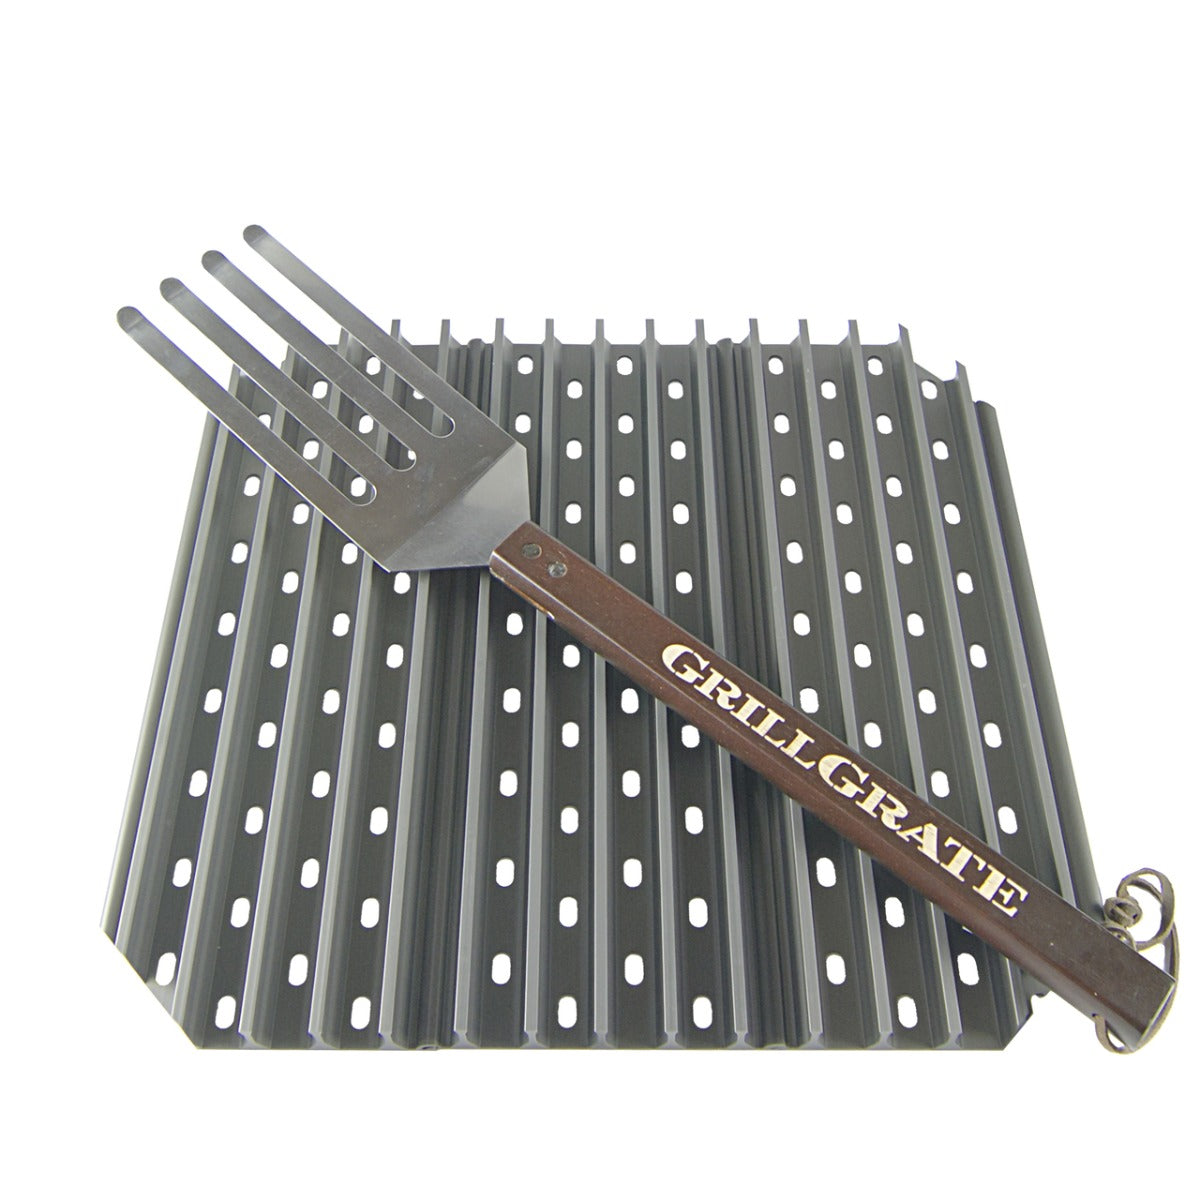 Grill Grate Three 13.75" Panels Mitre Cut for Large Kamado